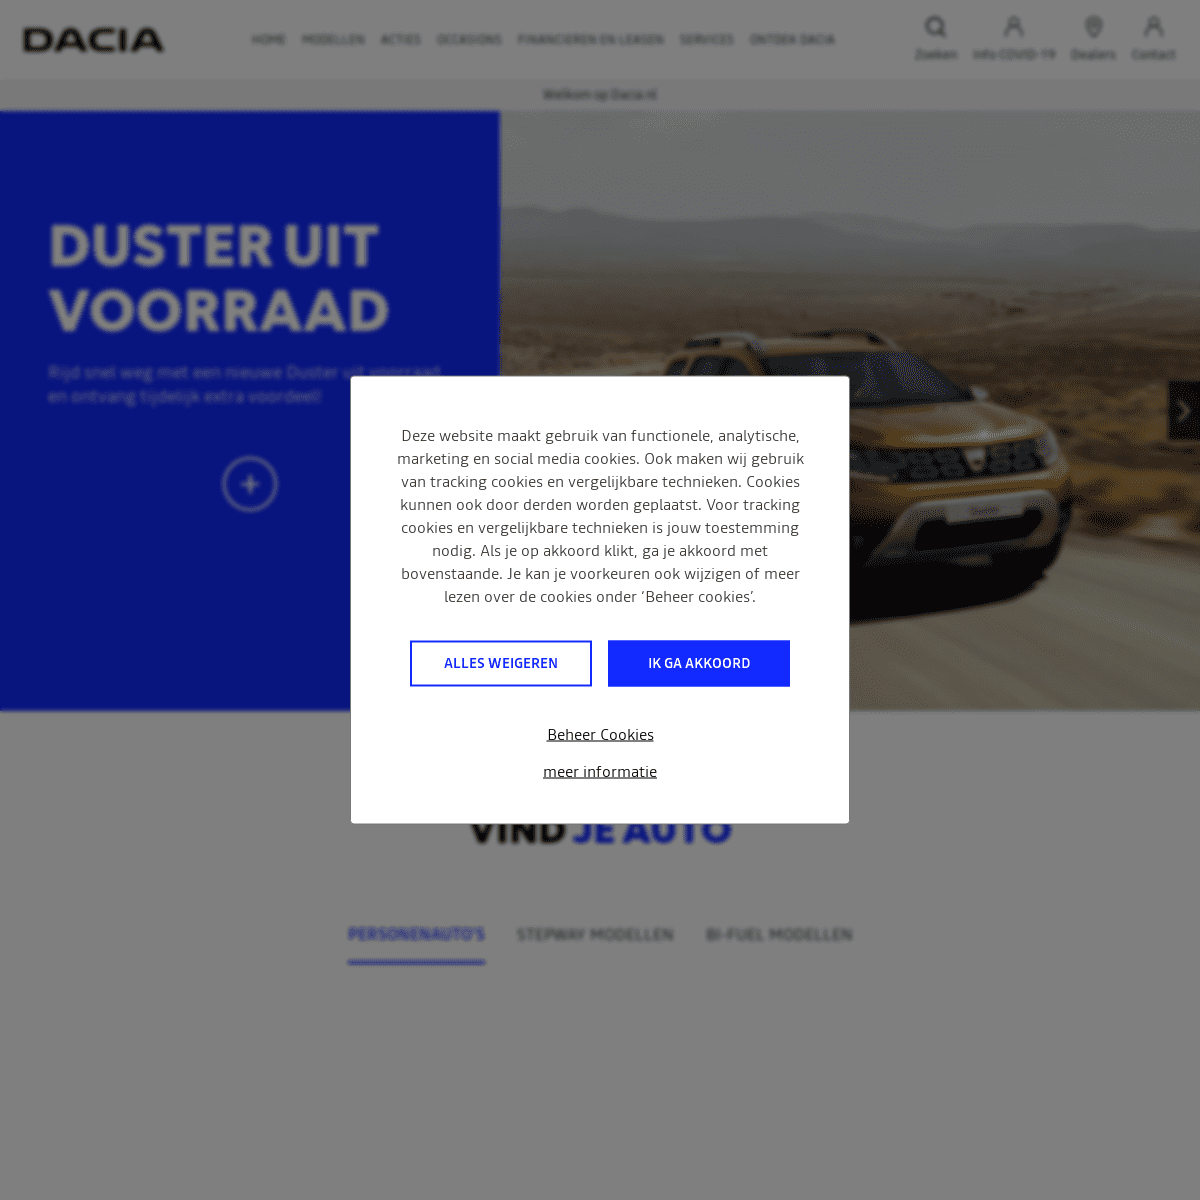 A complete backup of https://dacia.nl